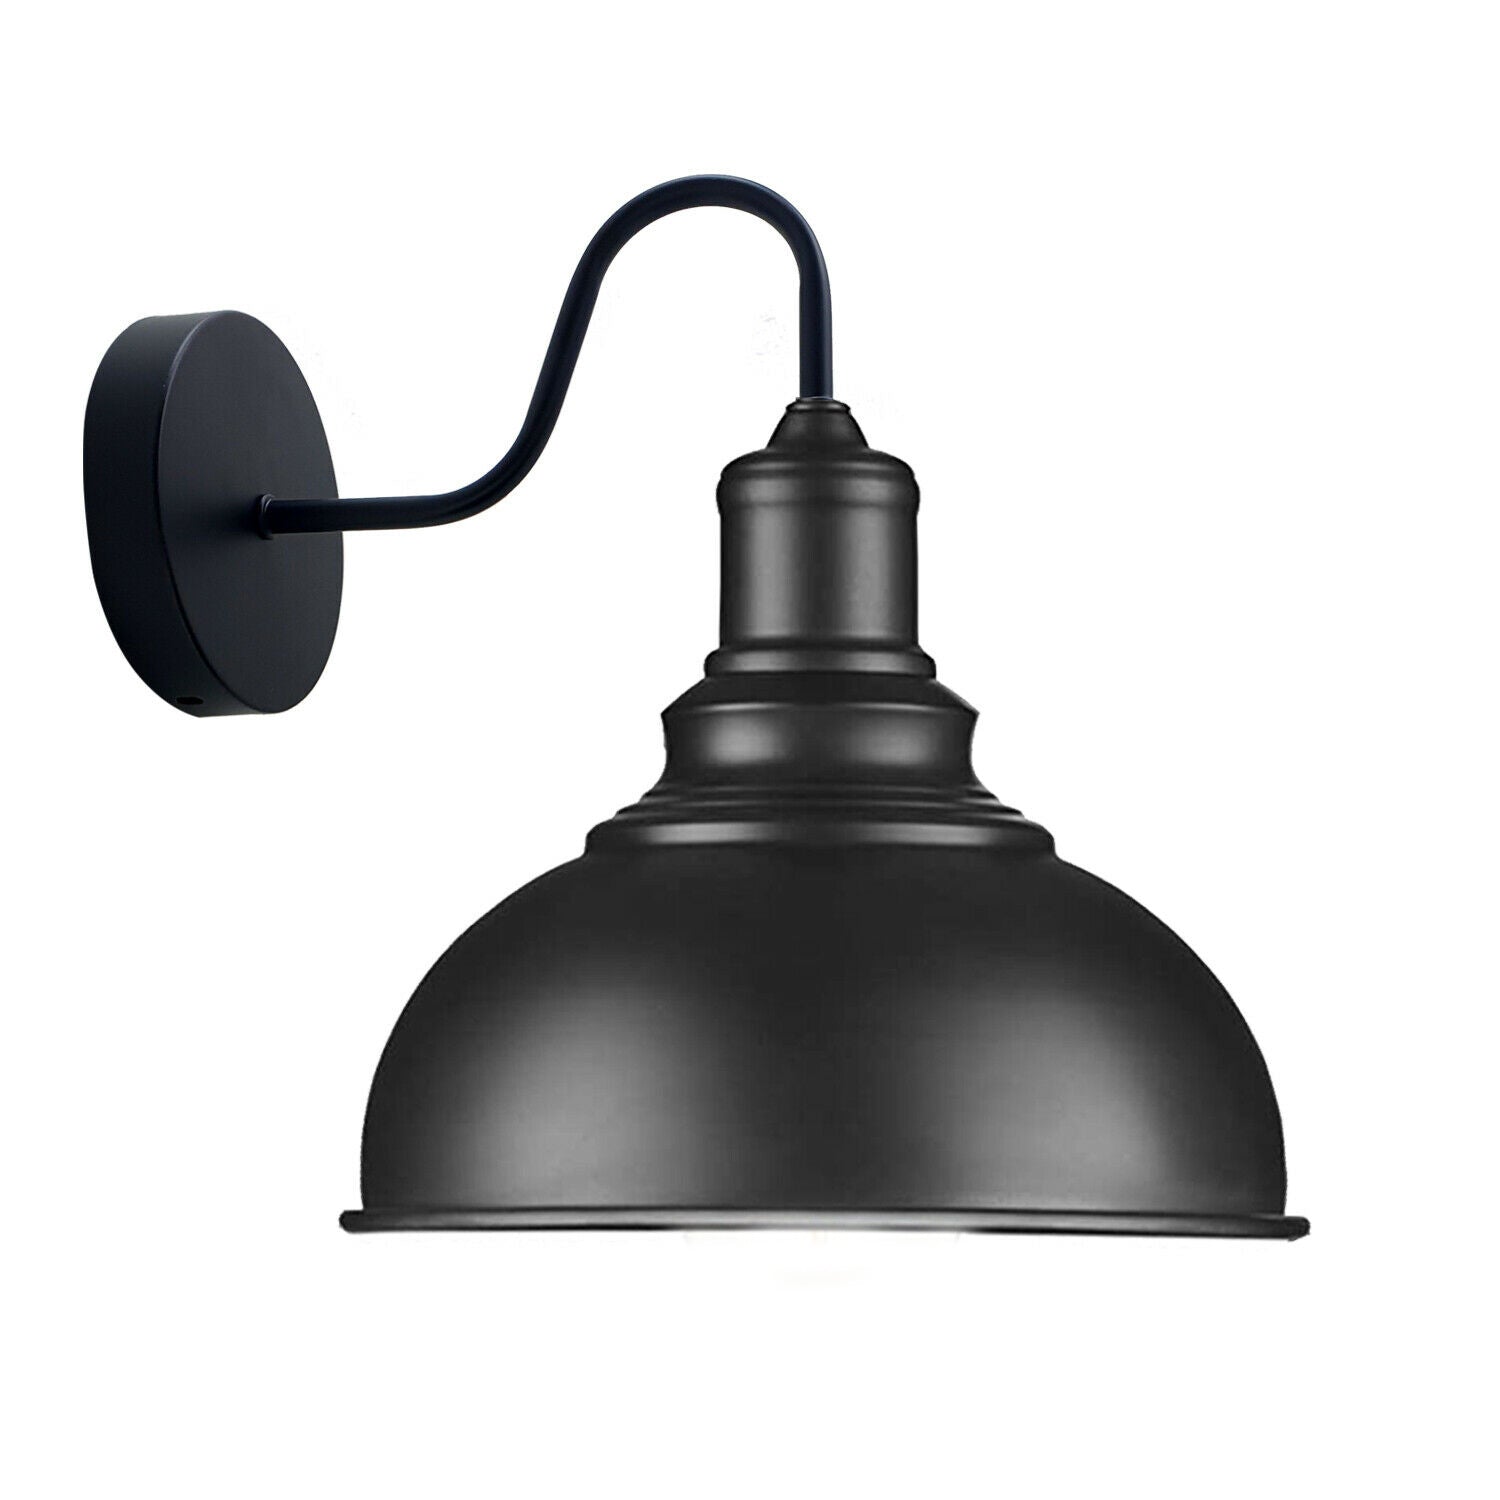 Wall Light with Switch Indoor Wall Industrial Vintage Wall Lamp with Plug Swing Arm Rotating E27 Black~1852 - LEDSone UK Ltd